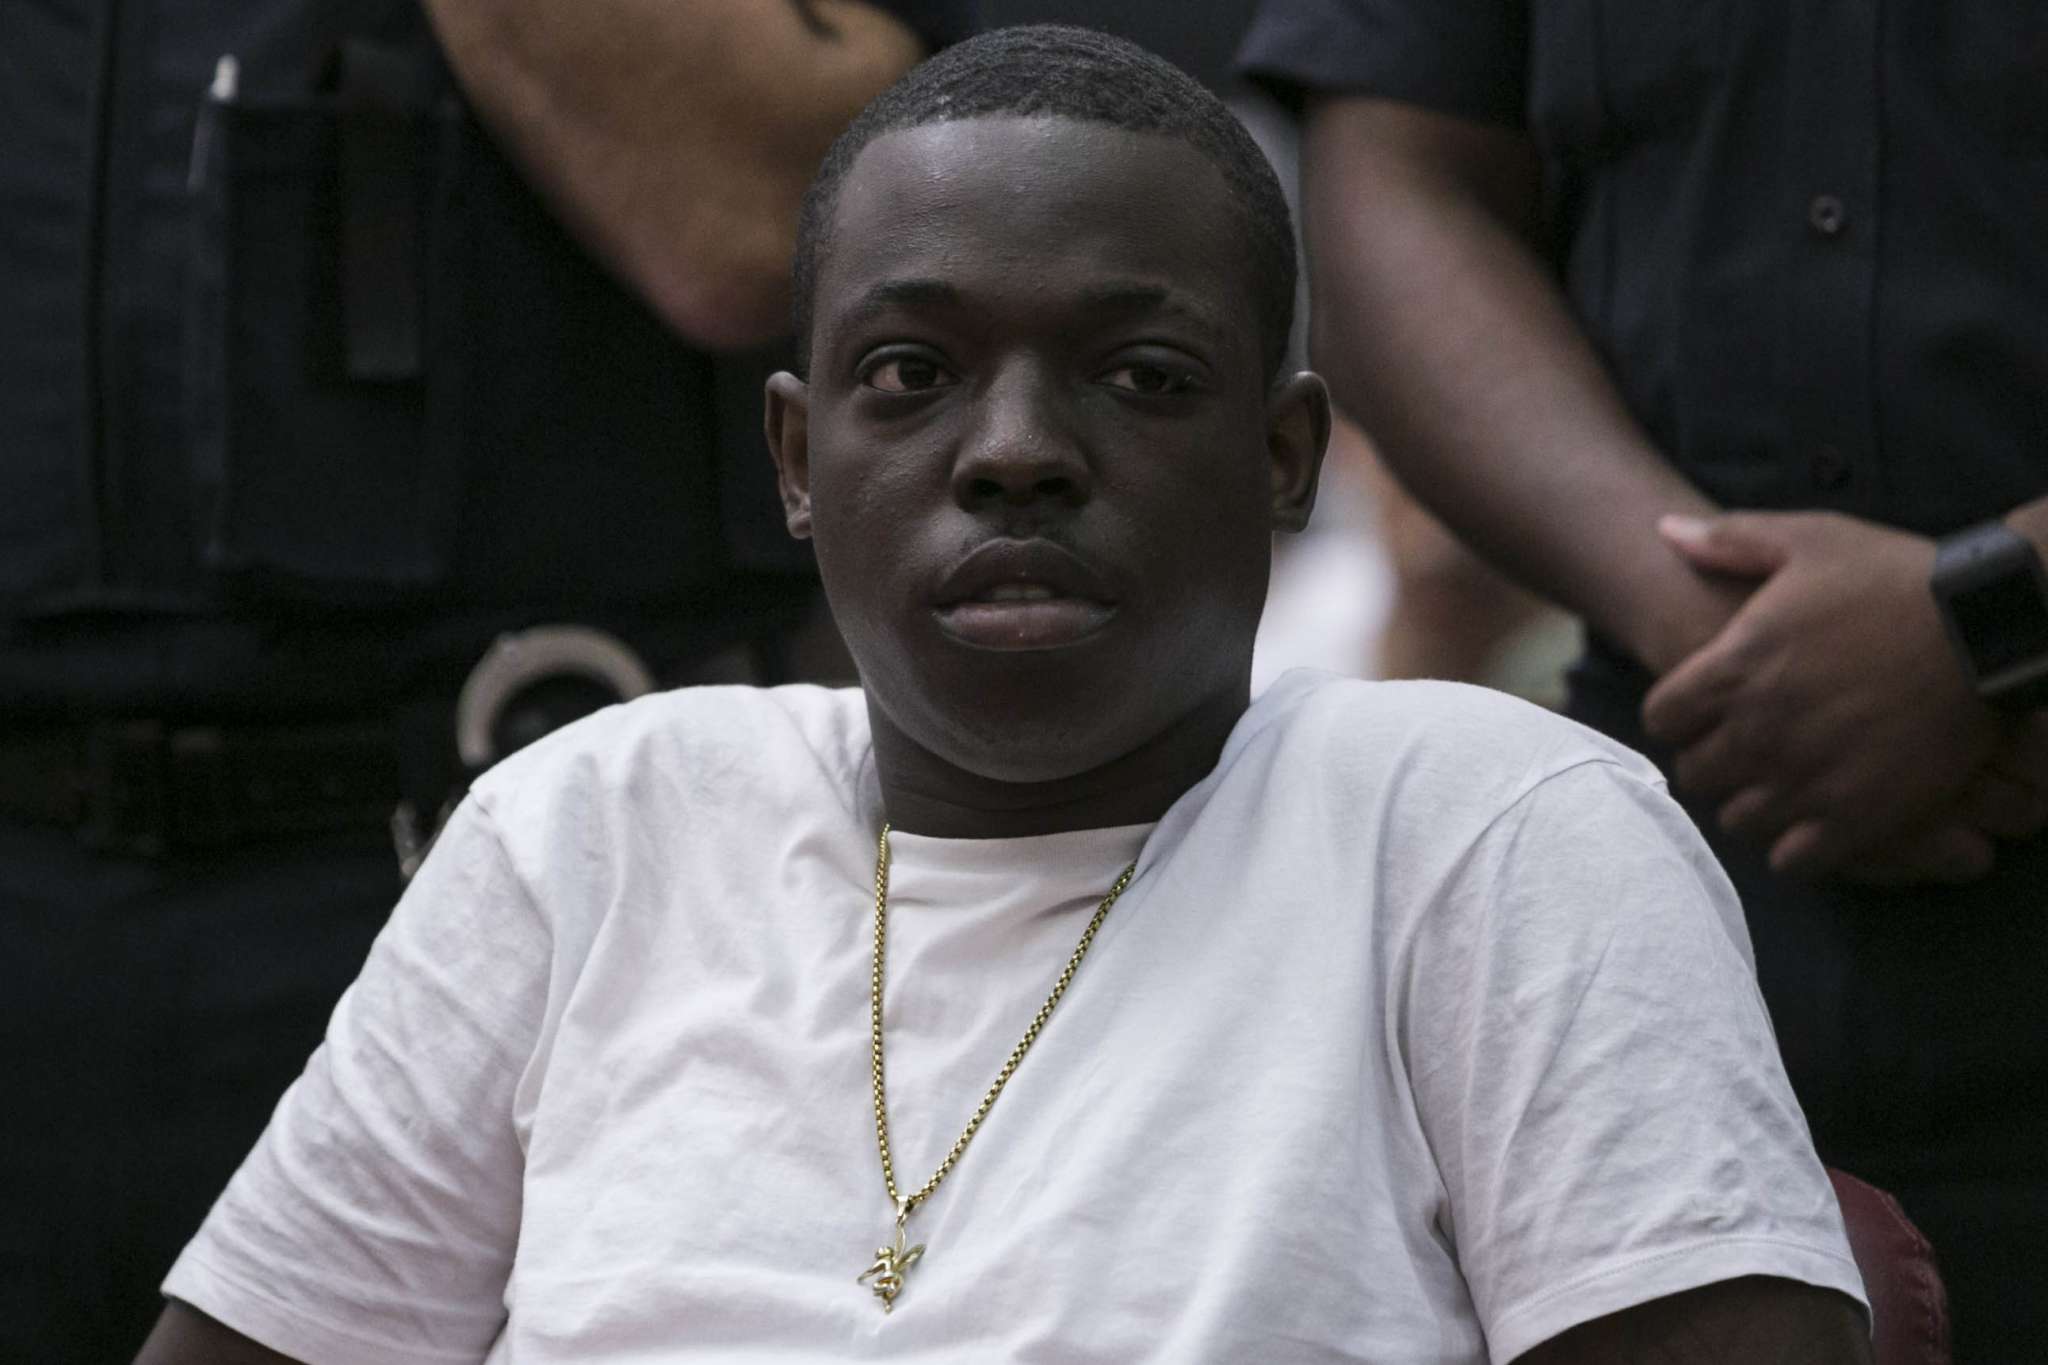 ”bobby-shmurda-addresses-dreams-that-some-people-never-chased”